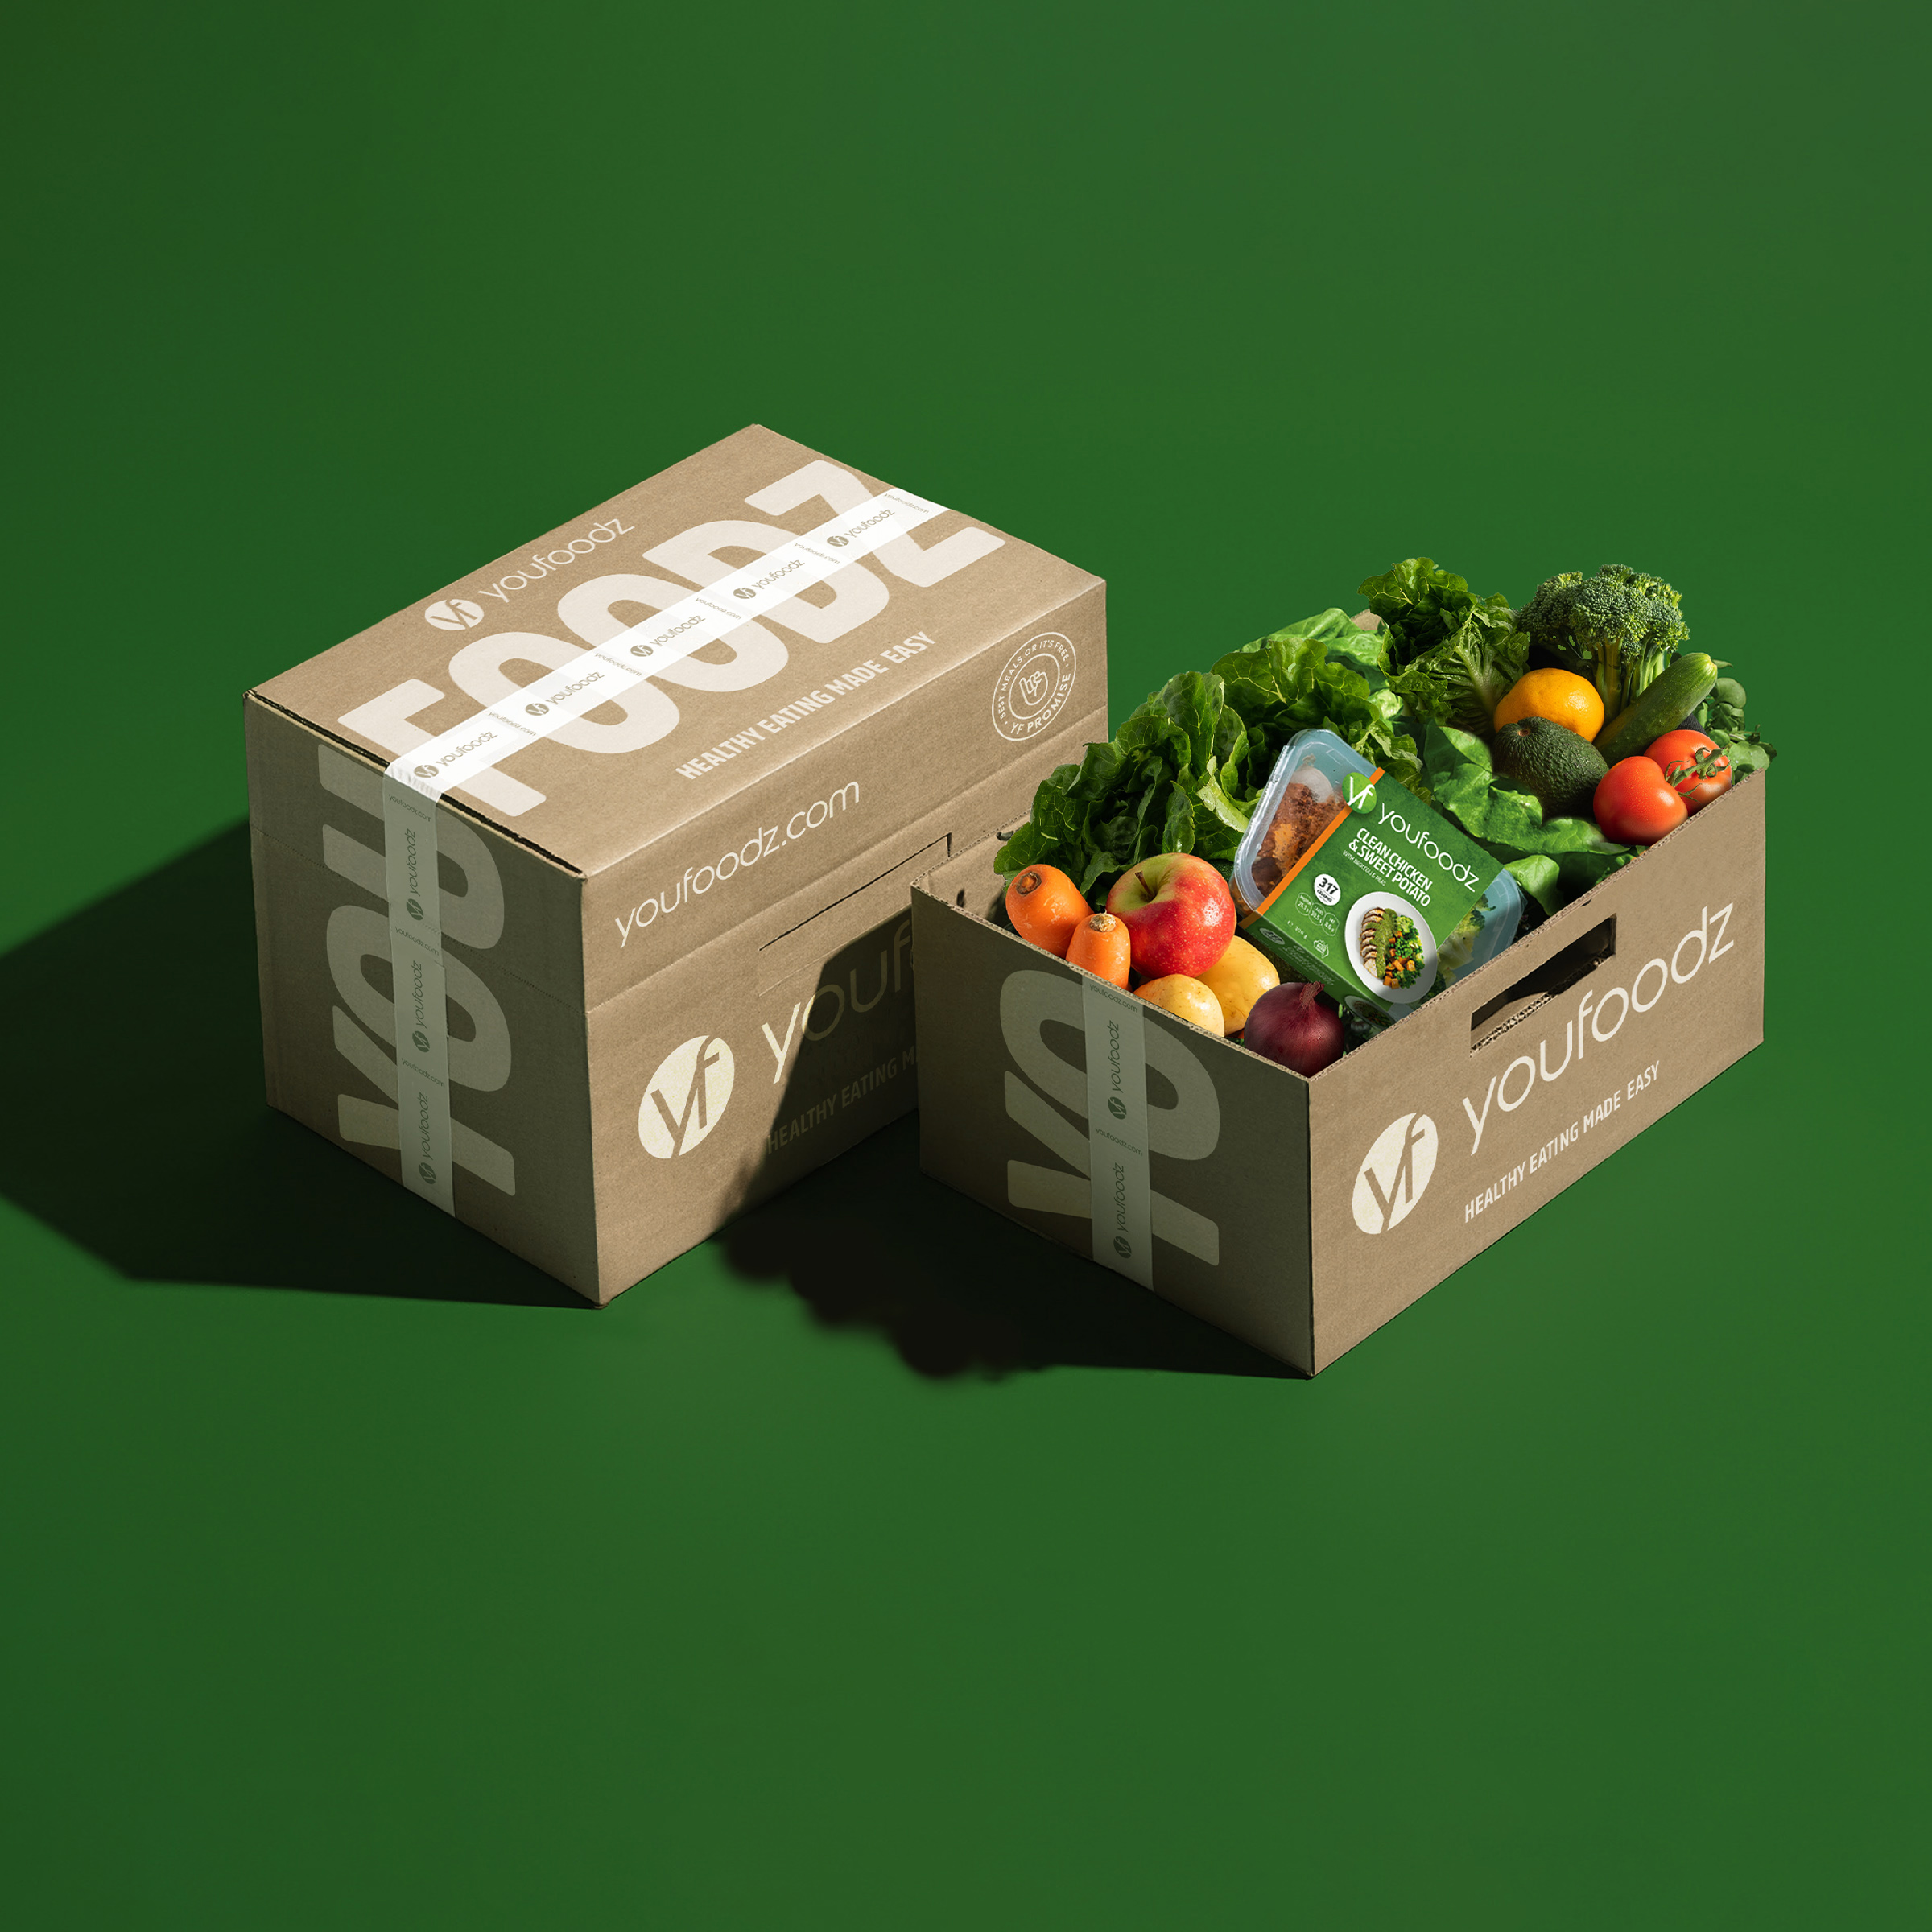 Mario Milostic Creates A Packaging Refresh for Youfoodz Regular Meal Range